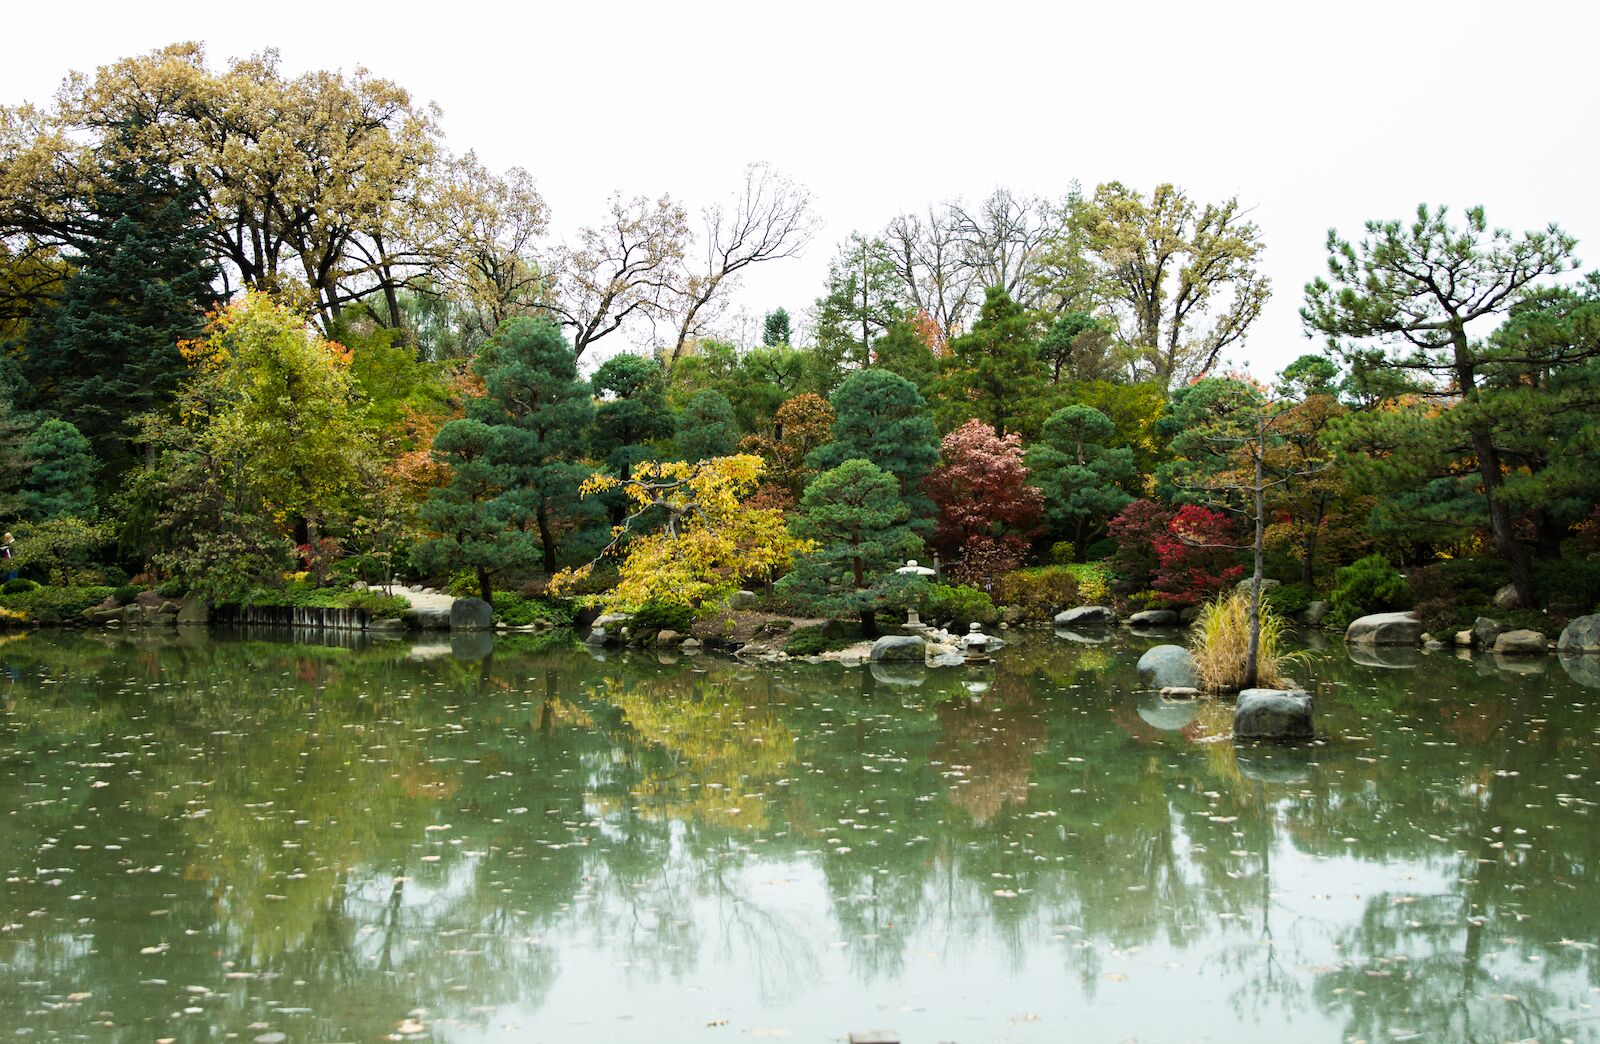 Beautiful pond Anderson Japanese Garden fall colors